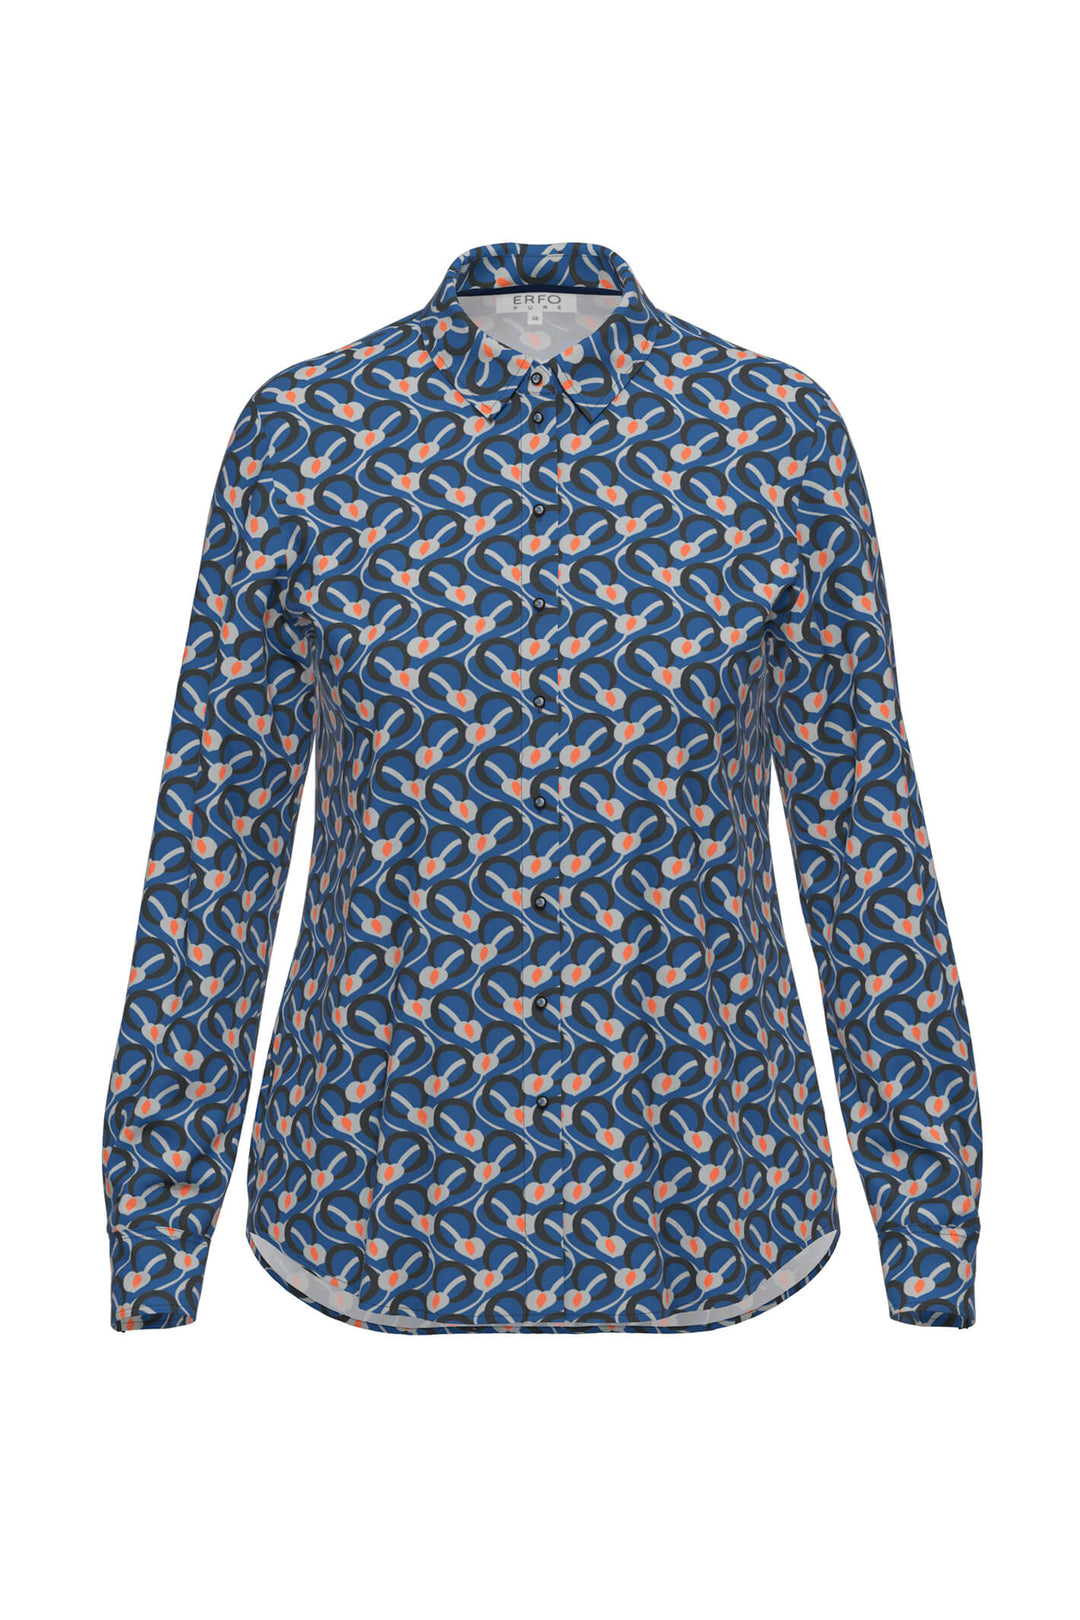 Erfo 511104300 7650 Patterned Royal Blue Shirt - Shirley Allum Boutique